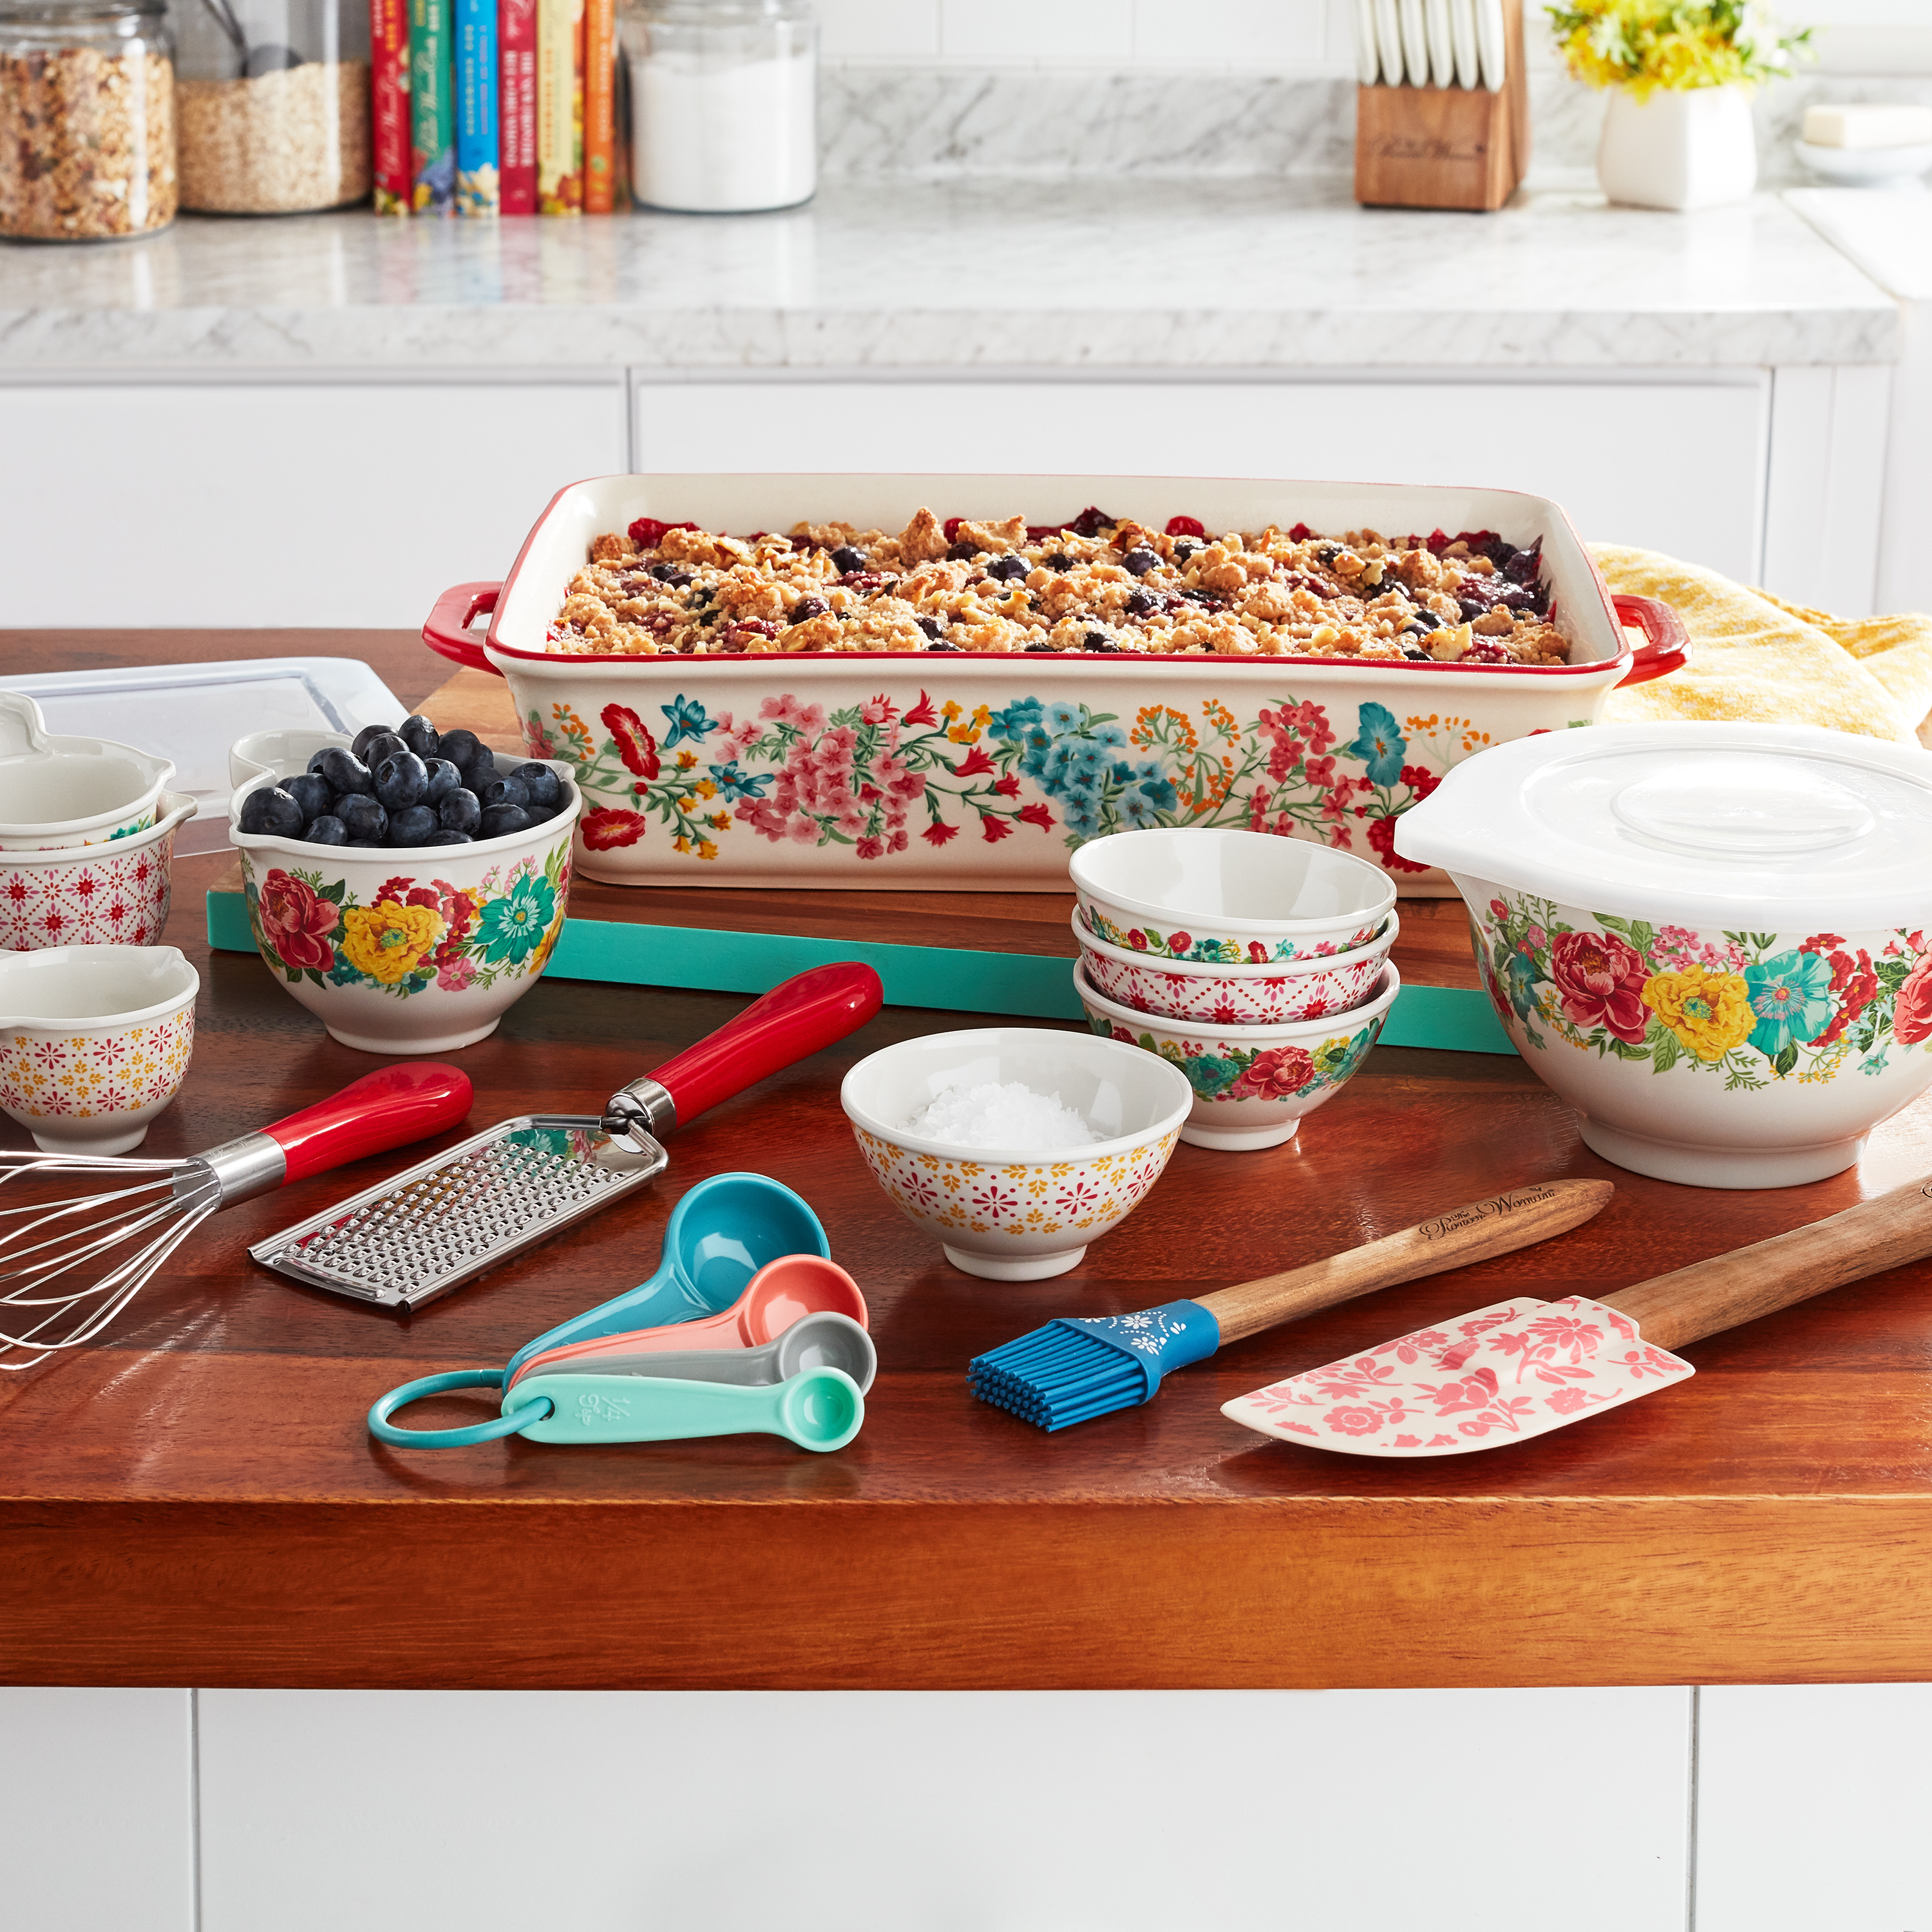 The Pioneer Woman Fancy Flourish 20-Piece Bake & Prep Set with Baking Dish & Measuring Cups - image 4 of 8